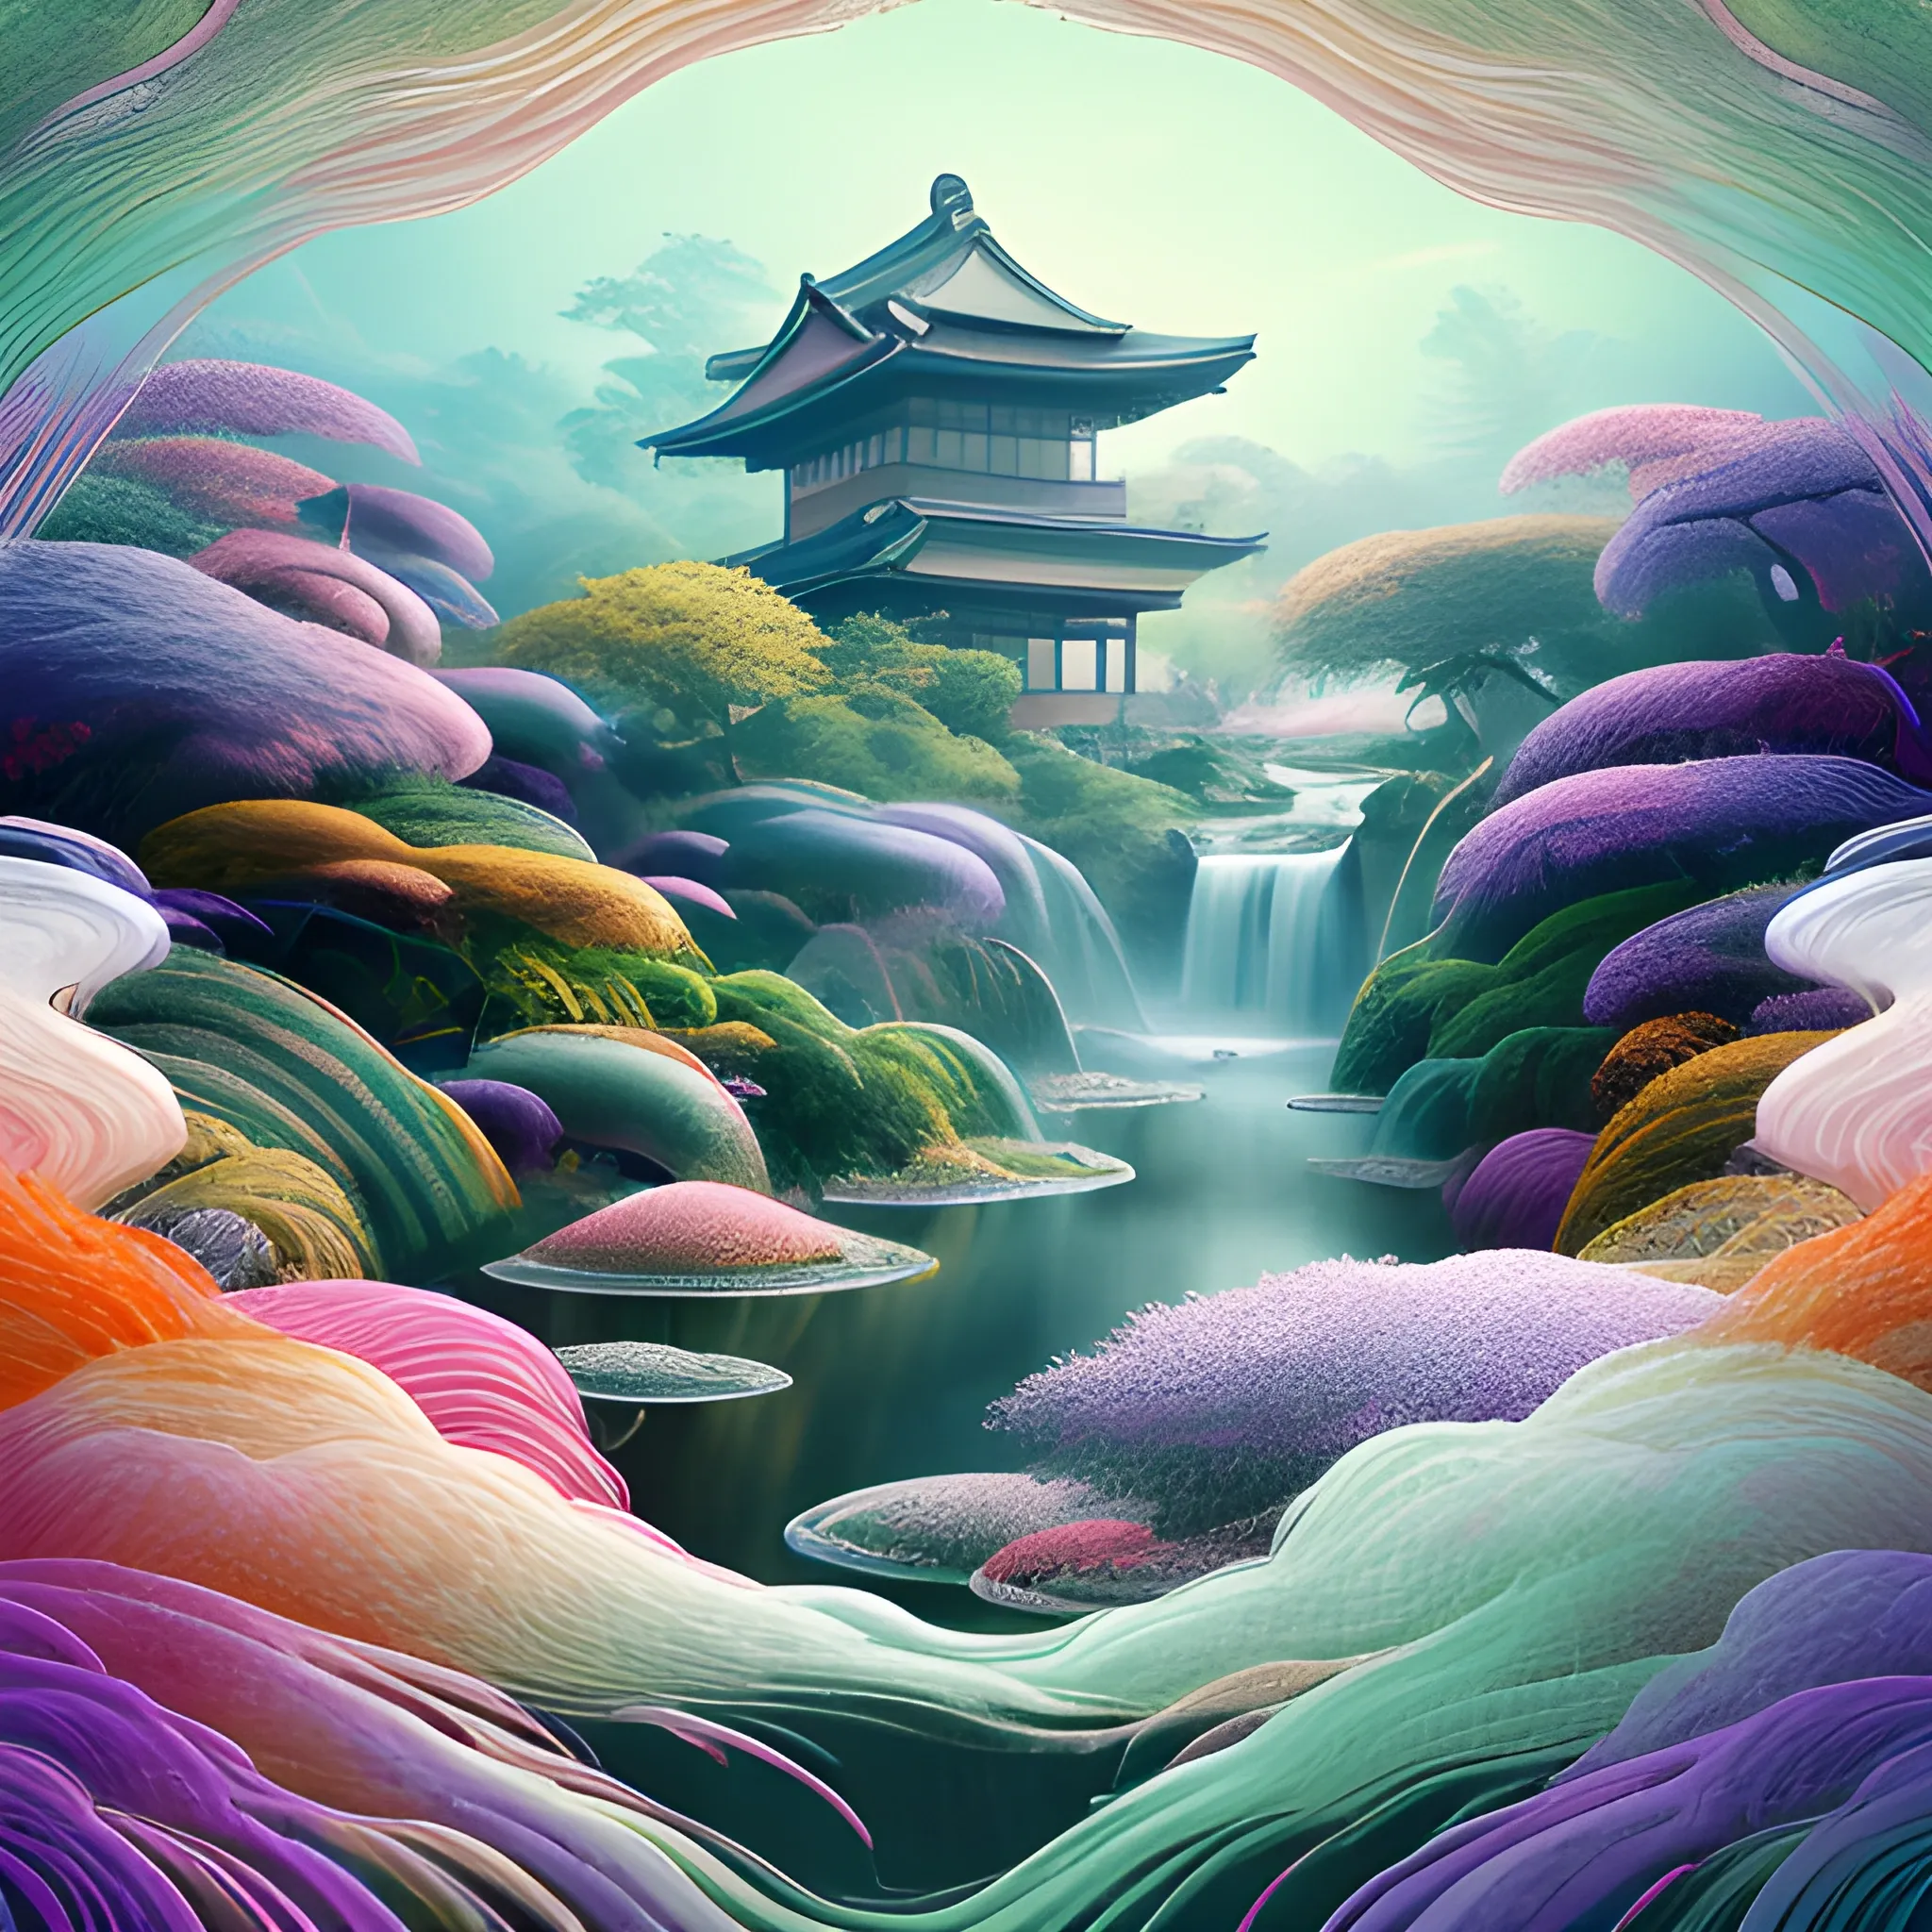 (by Ananta Mandal (and Andrew Biraj:0.5)), (in the style of nihonga), Style: Abstract, Medium: Digital illustration, Subject: An otherworldly landscape with floating islands, cascading waterfalls, and vibrant flora and fauna. Camera Angle: Overhead shot capturing the vastness and intricate details of the scene. The colors are saturated, and the lighting creates a warm and ethereal atmosphere. The painting is highly detailed, with every brushstroke capturing the complexity of the imaginary world., (high quality), (detailed), (masterpiece), (best quality), (highres), (extremely detailed), (8k), seed:1015789